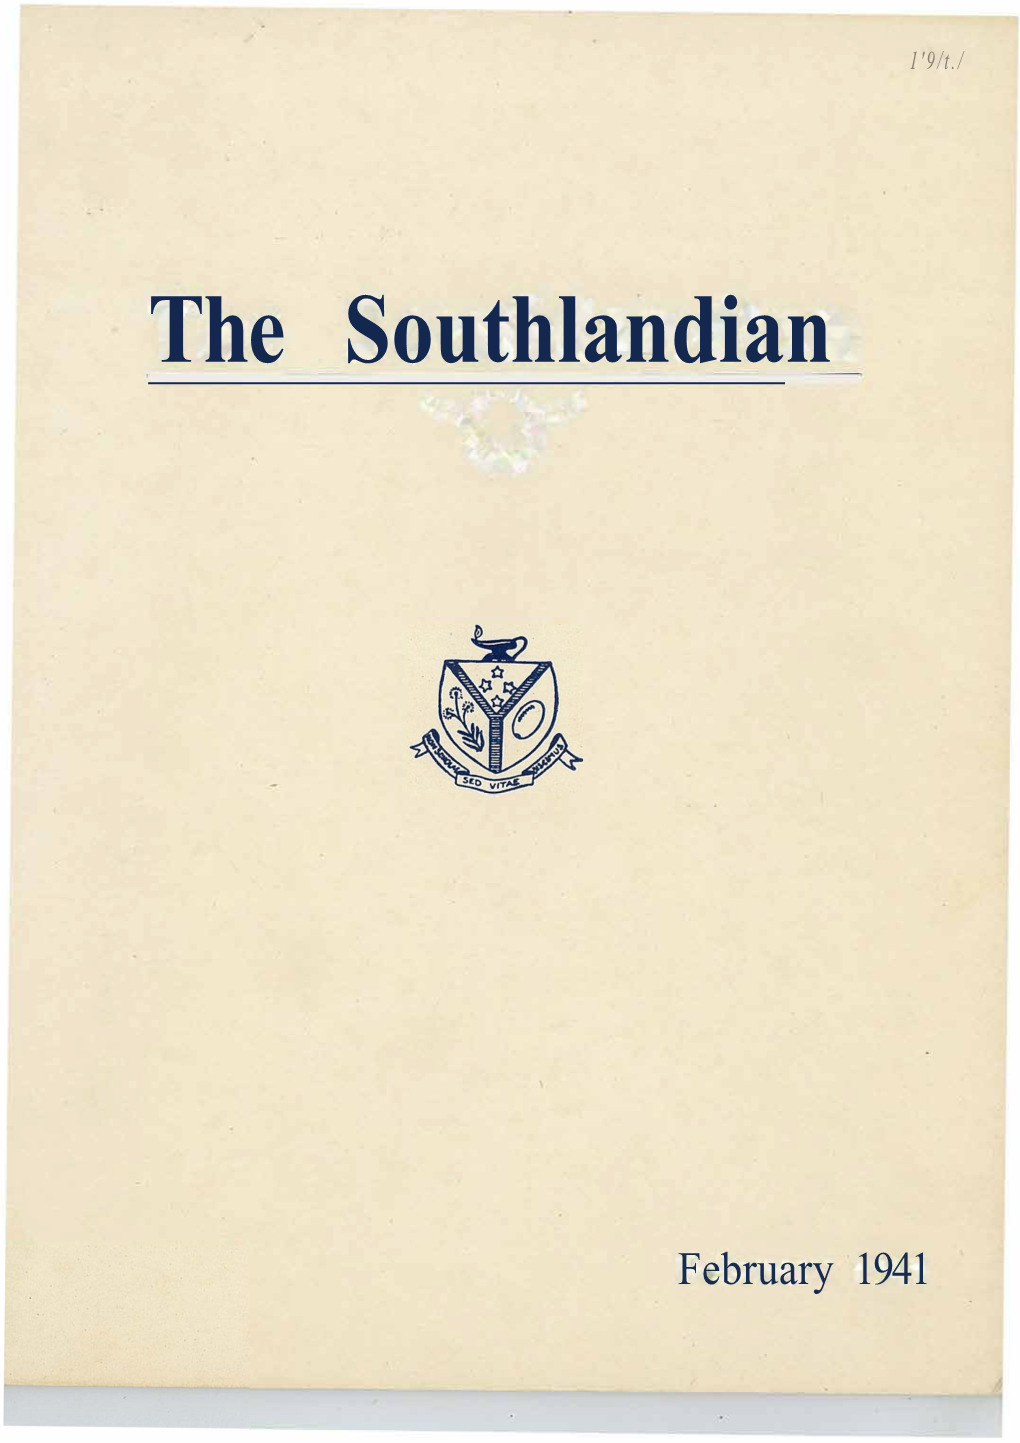 The Southlandian